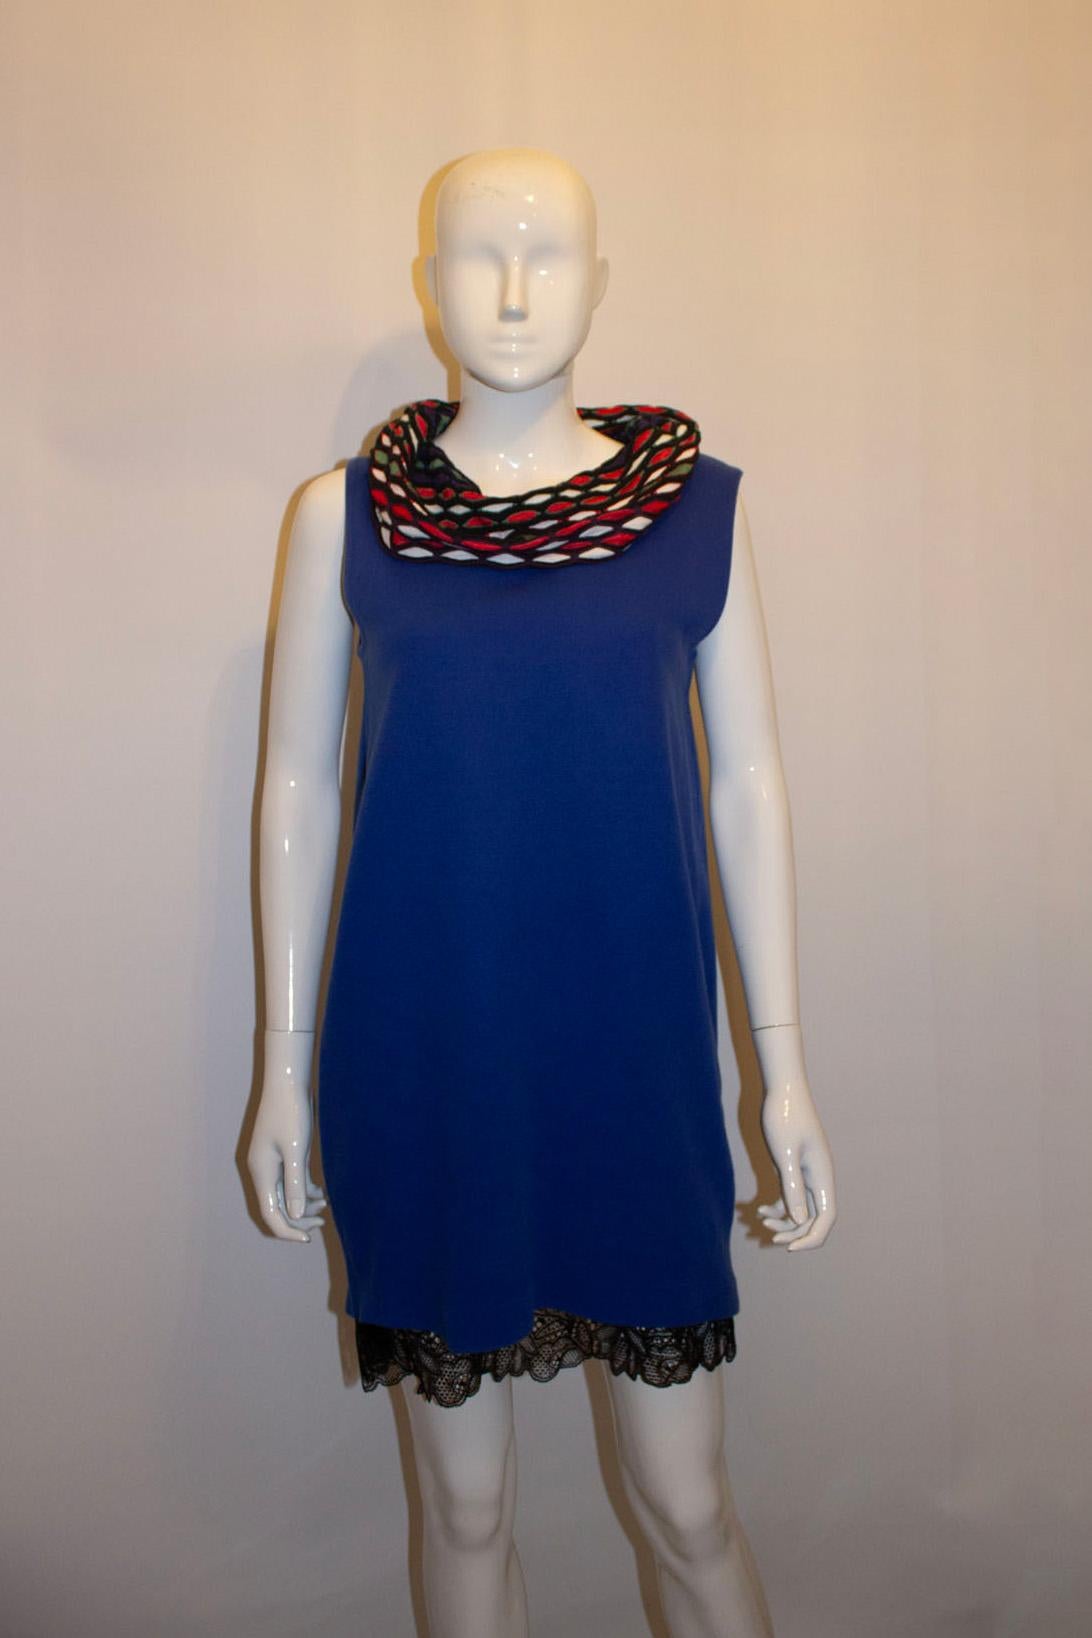 A fun and bright top from Missoni M line. The body is in a bright blue colour with a wide multicolour collar, blue ,grey, red and white. 100% cotton.
Size L Measurements: Bust up to 40'', length  32''